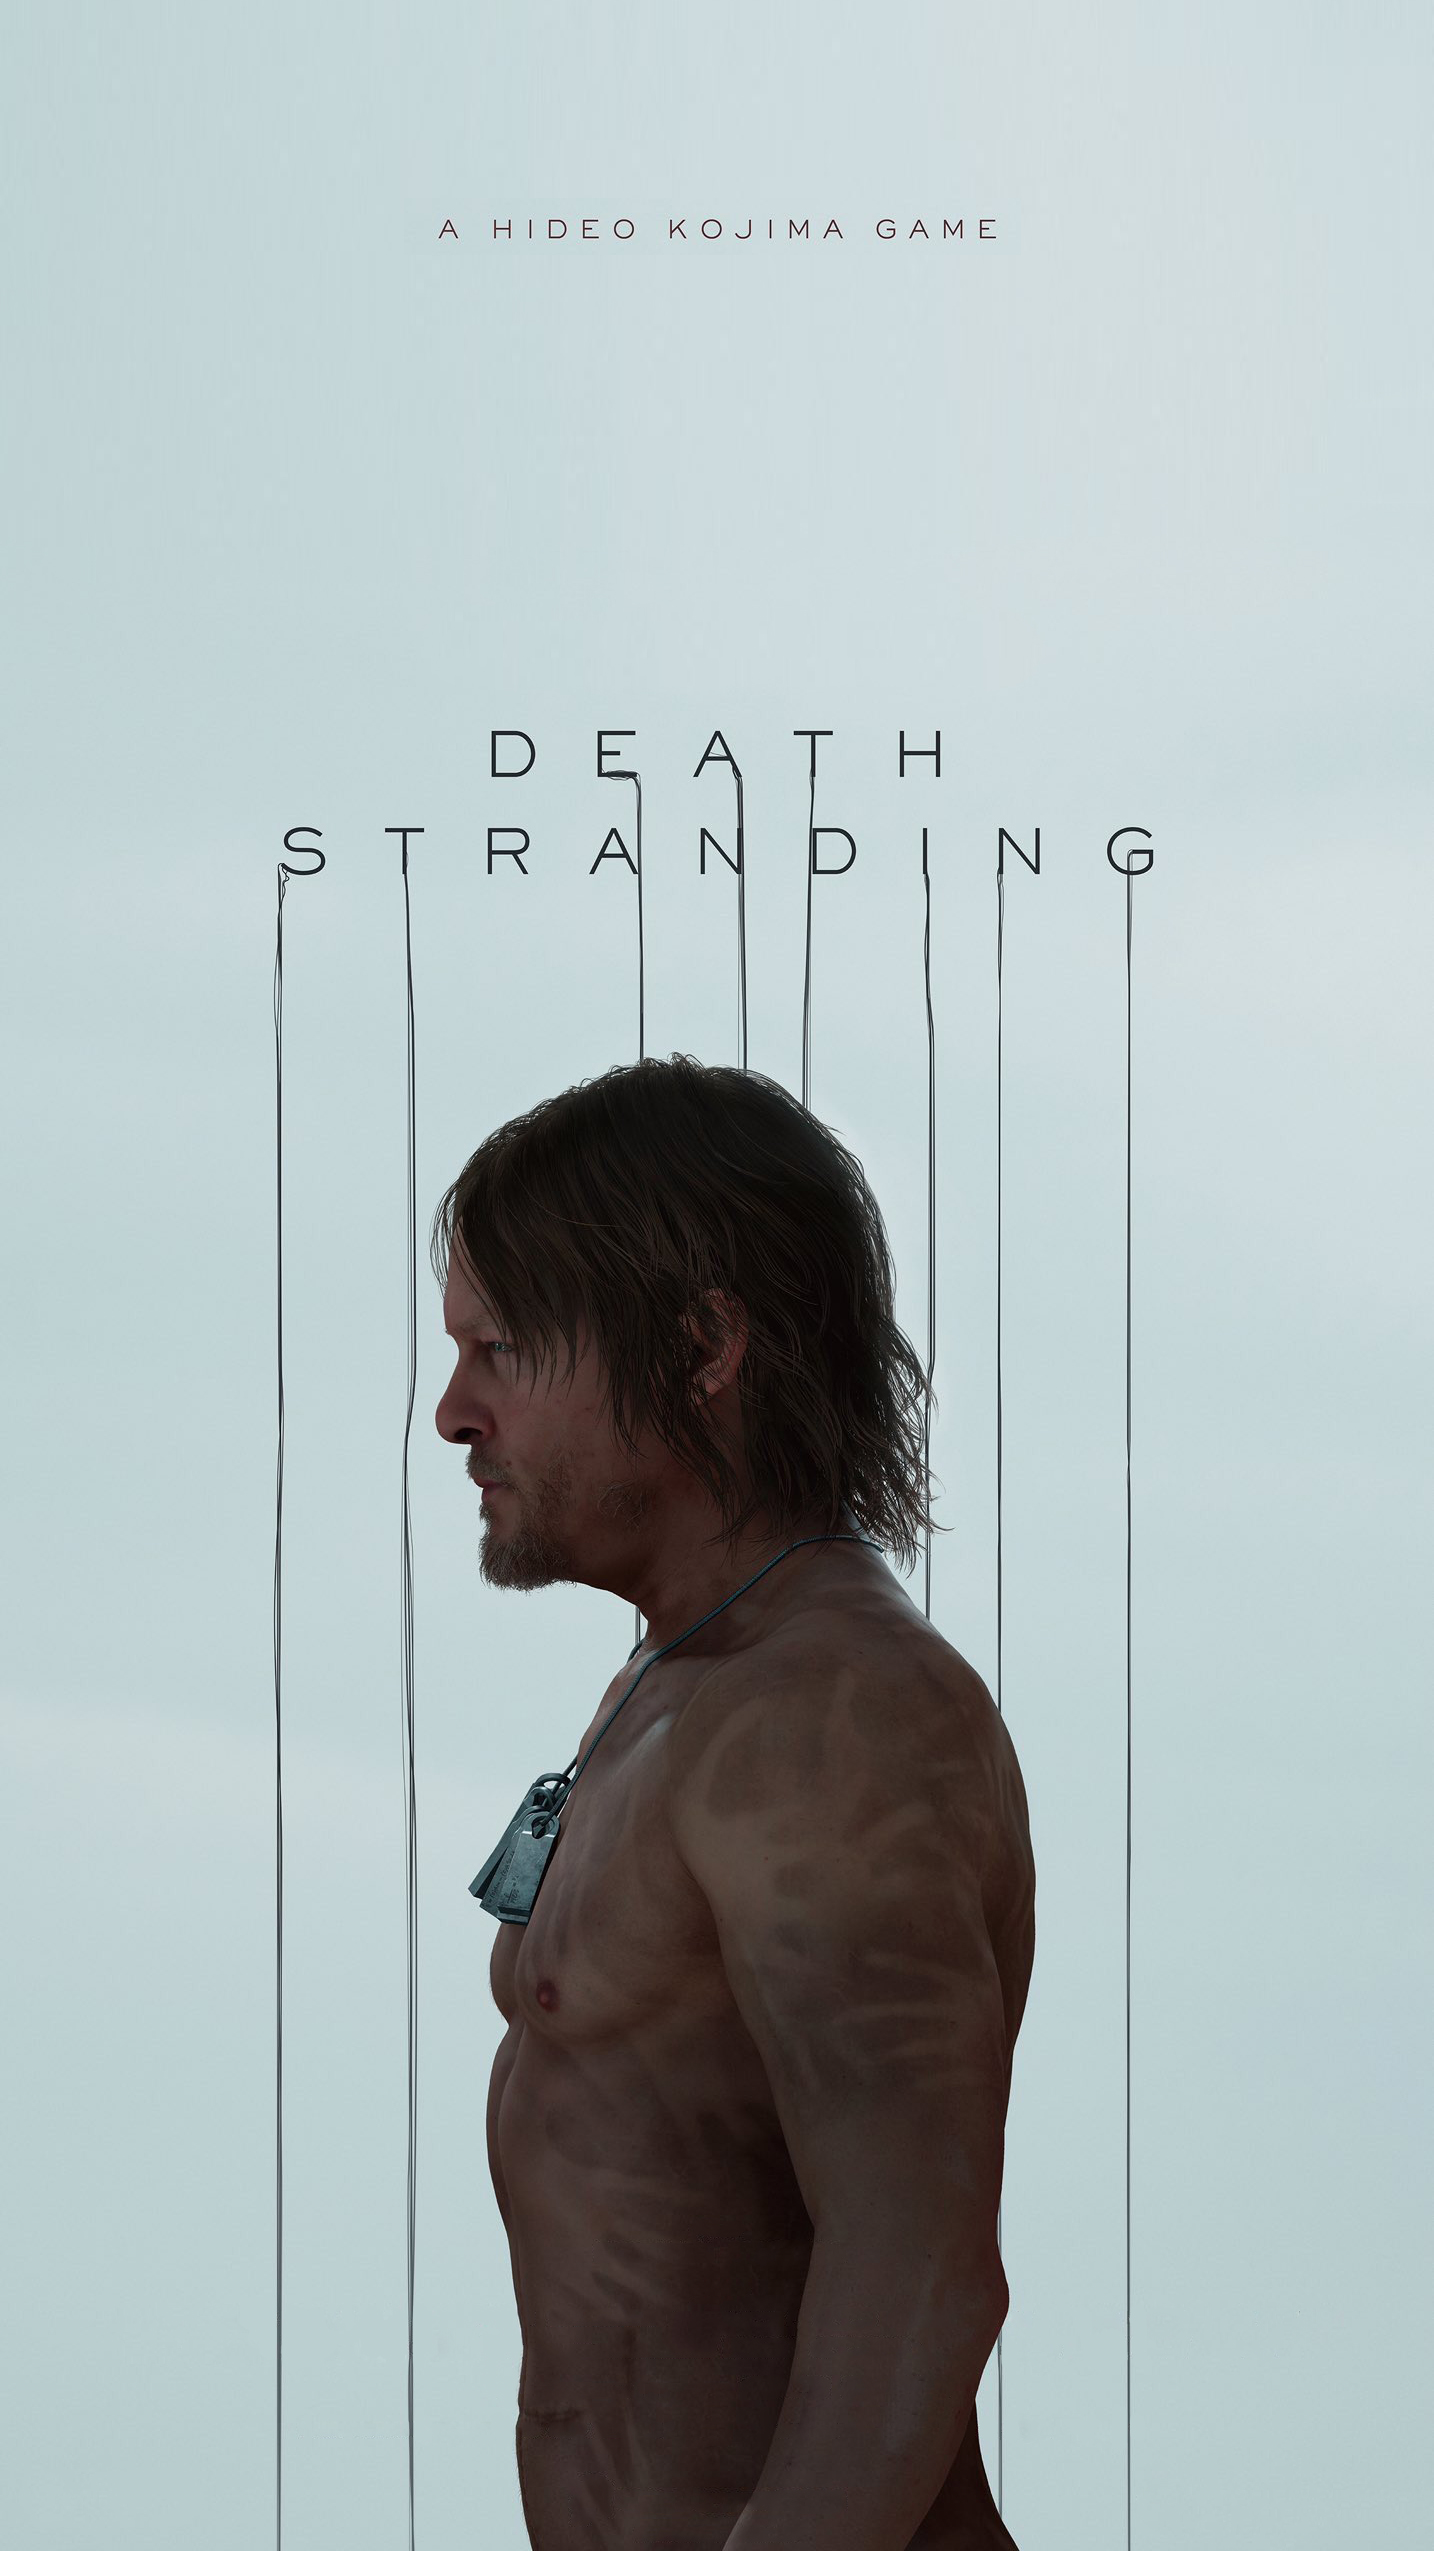 People Are Trying To Decipher The Trailer For Hideo Kojima’s New Game, Death Stranding